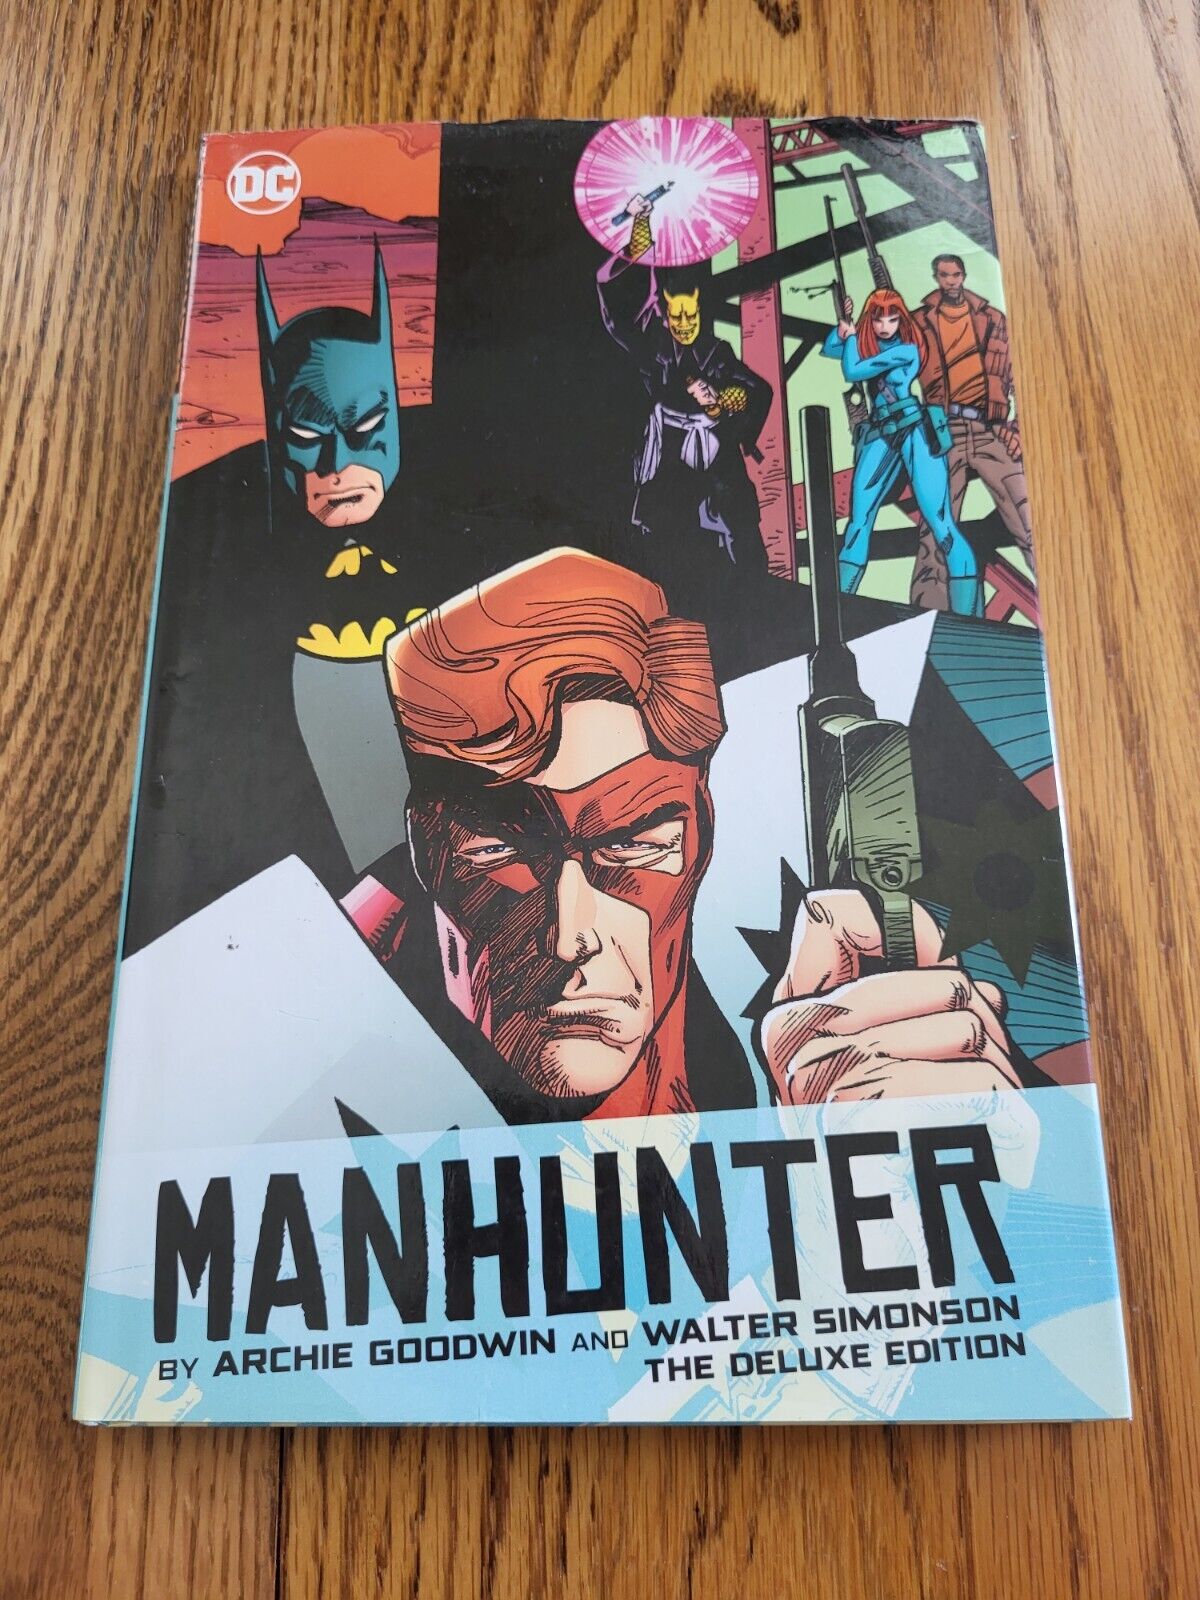 DC Comics Manhunter by Archie Goodwin - Deluxe Edition (Hardcover, 2020)